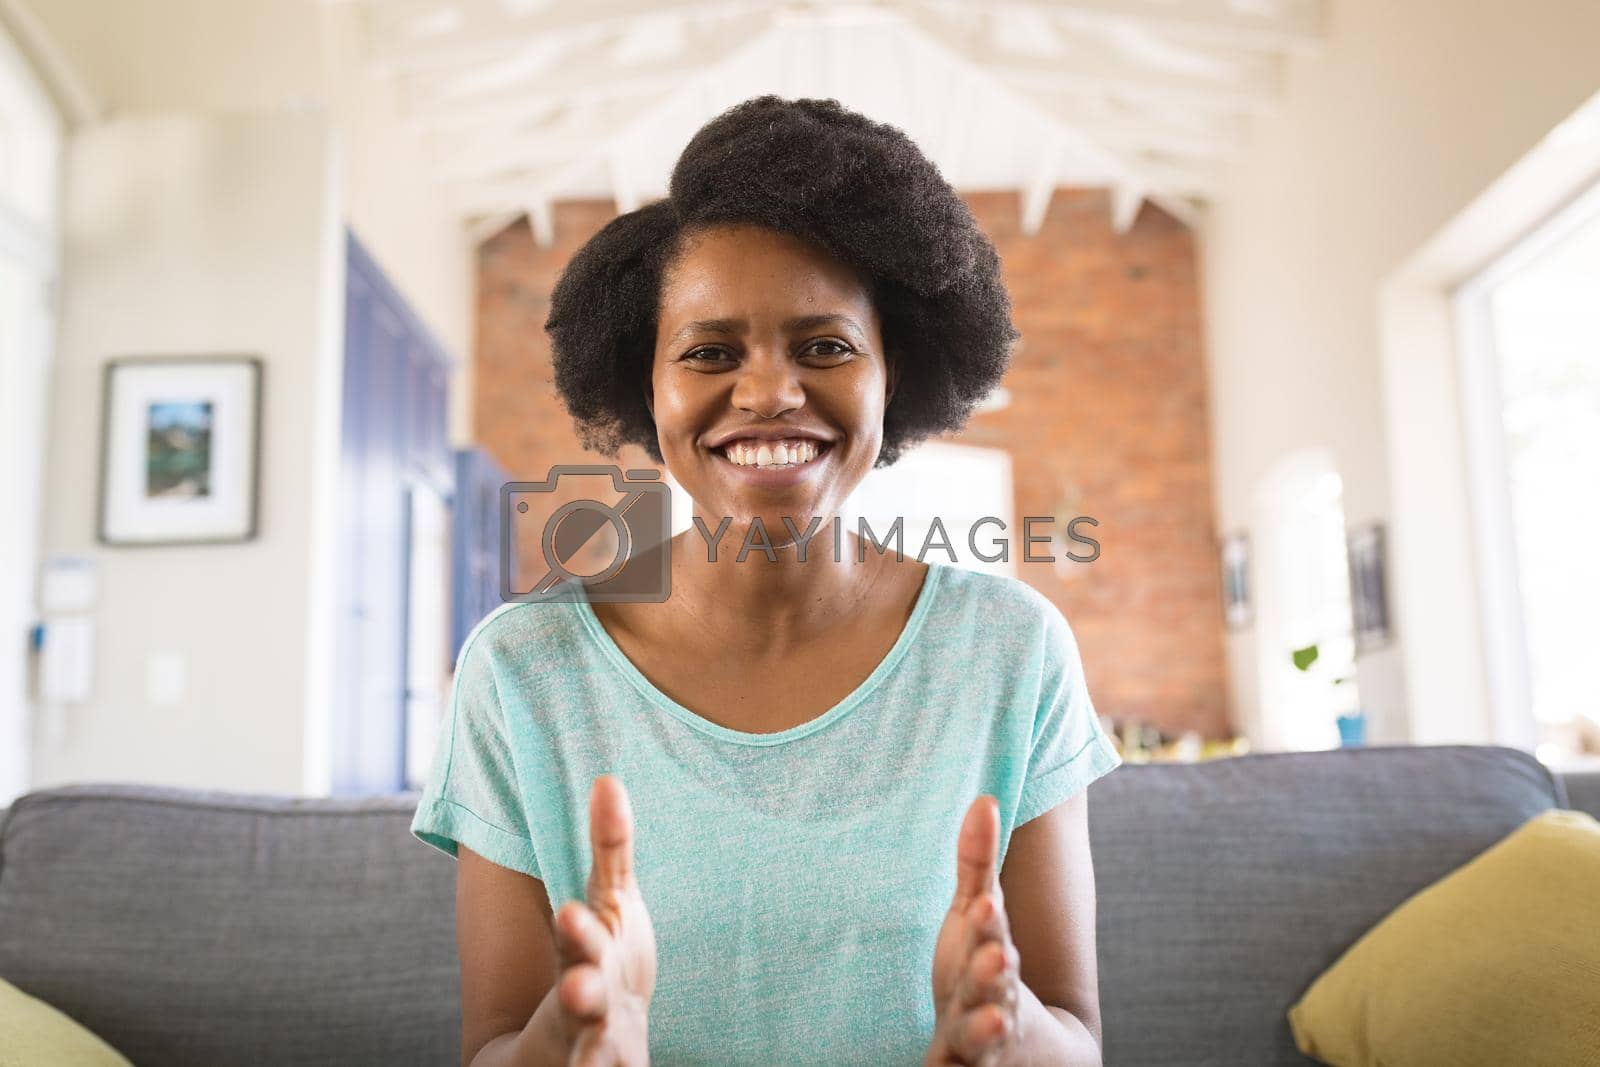 Royalty free image of Portrait of cheerful african american woman gesturing while explaining on video call at home by Wavebreakmedia